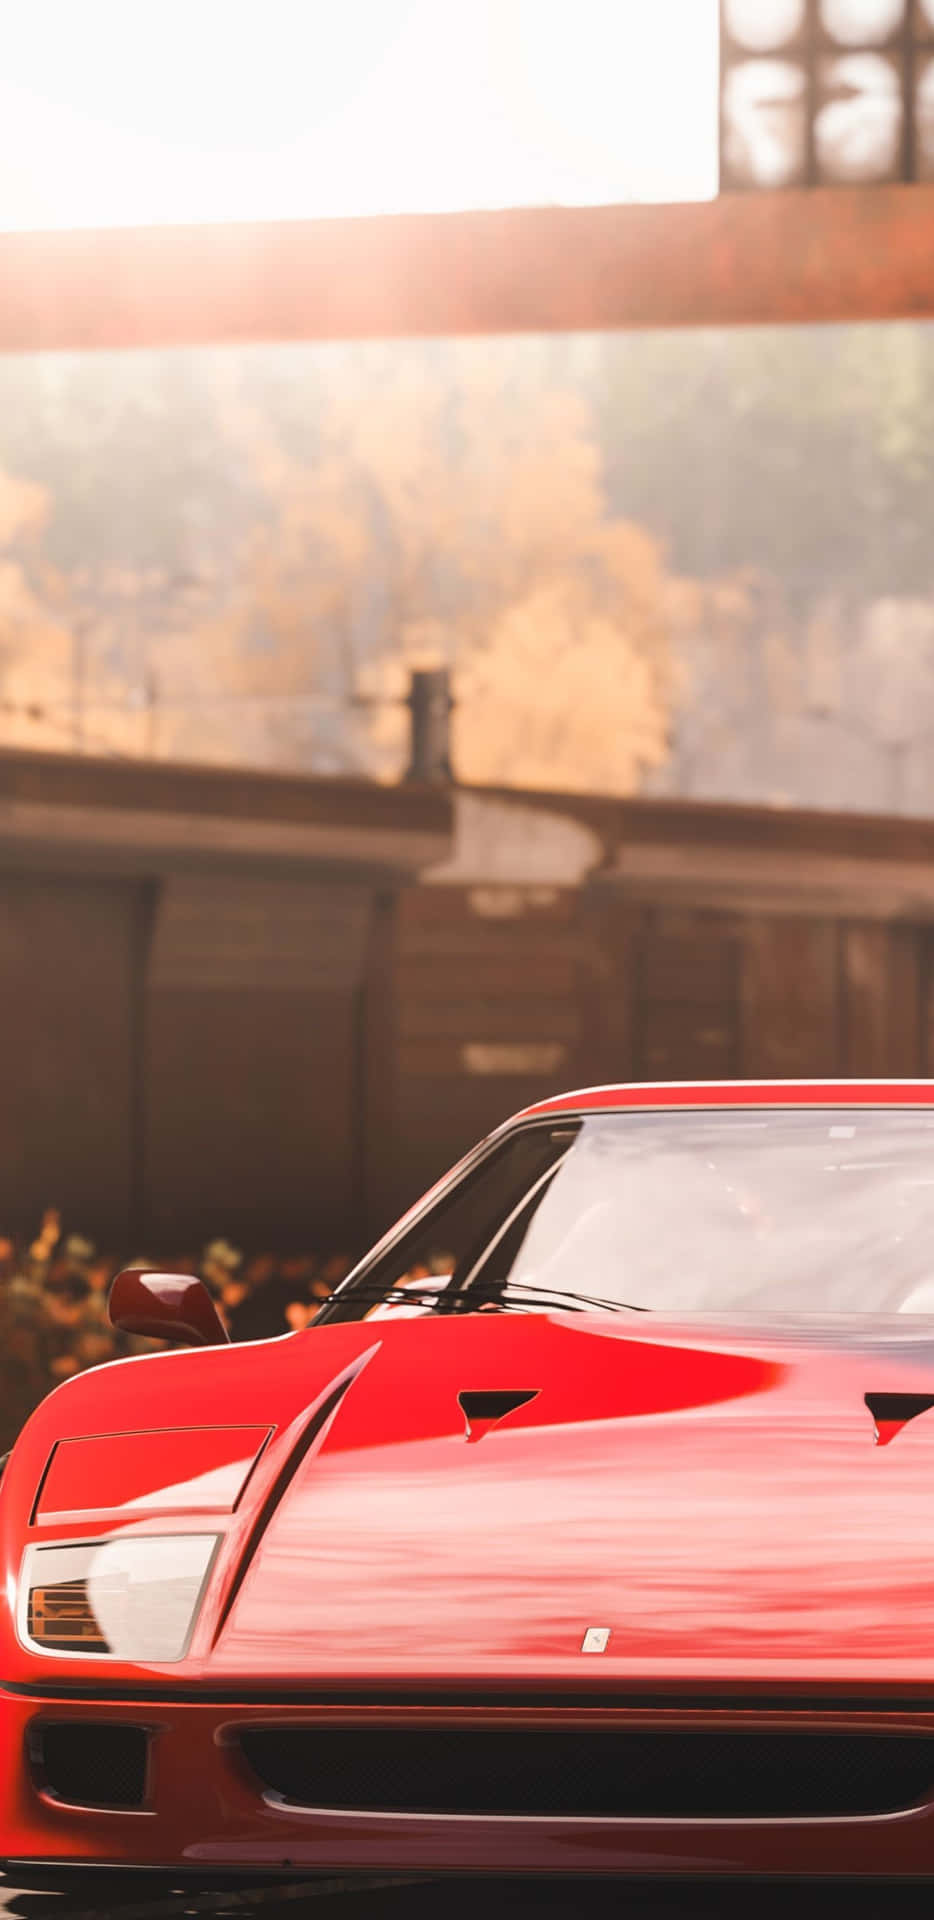 Fuel Your Need for Speed With Pixel 3xl and Forza Horizon 4